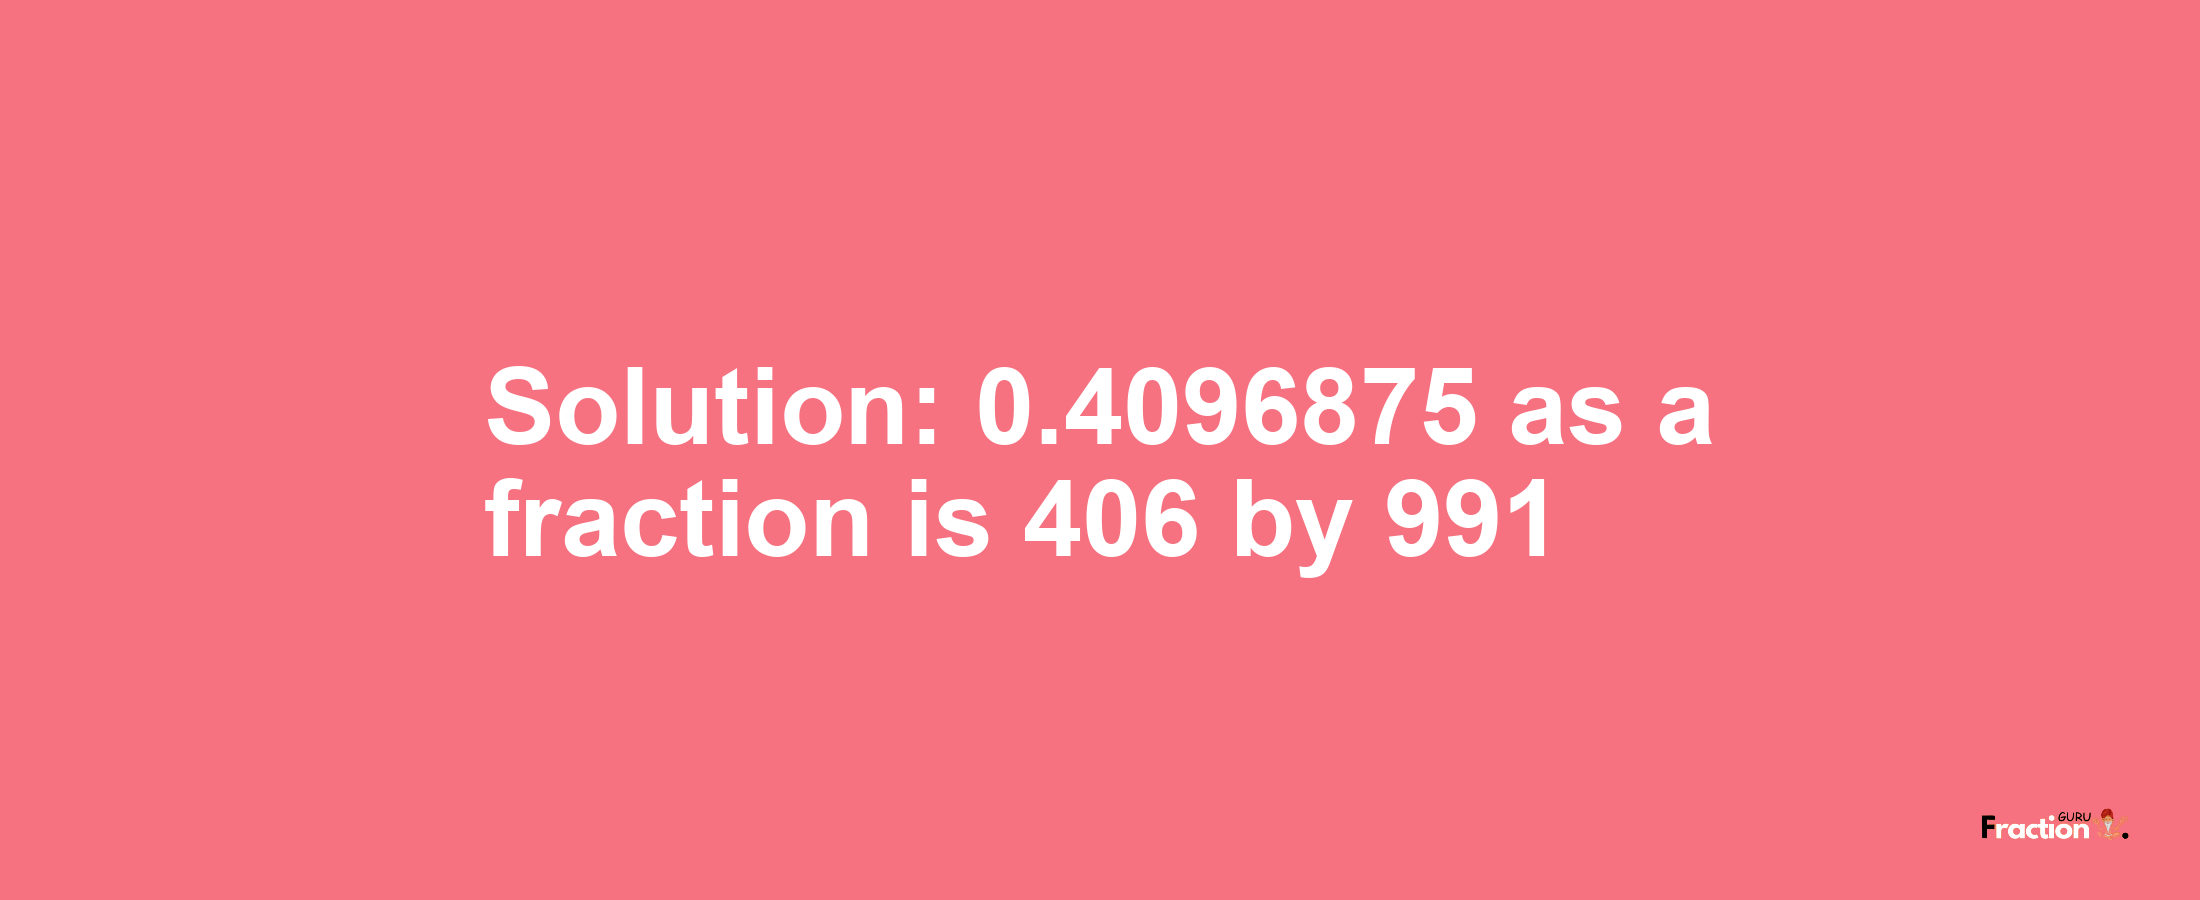 Solution:0.4096875 as a fraction is 406/991